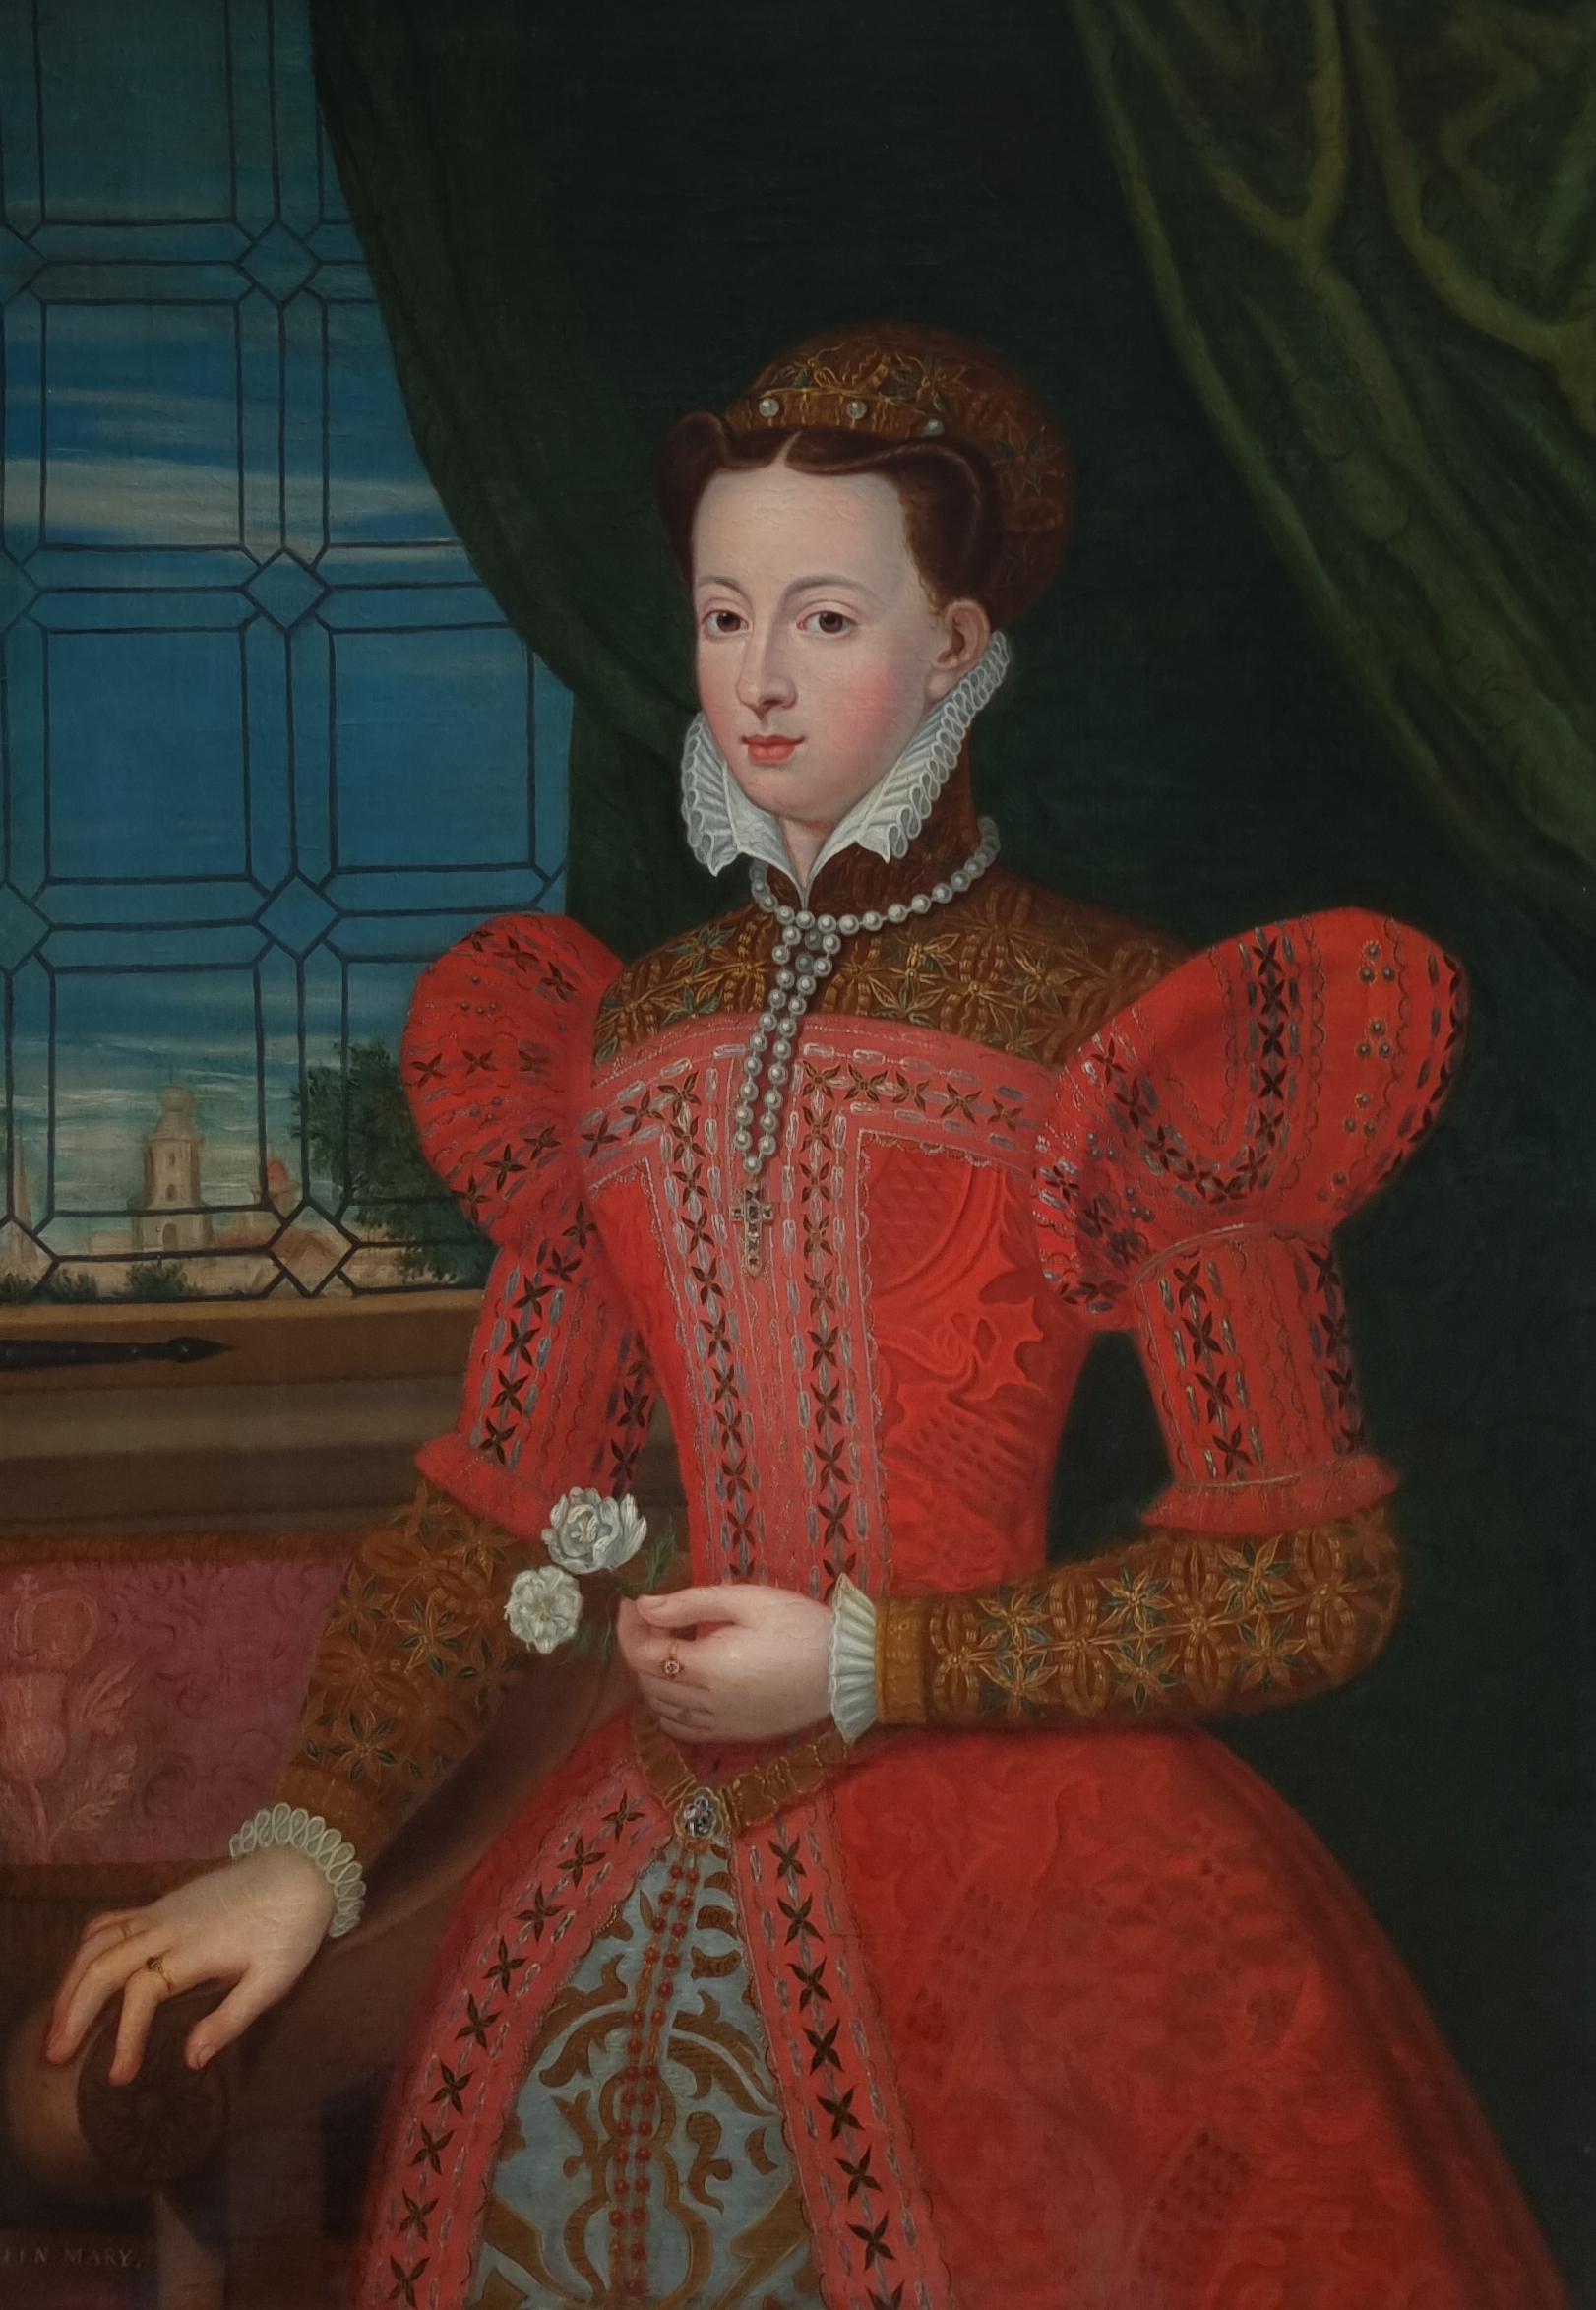 This impressive half-length portrait, presented by Titan Fine Art, was painted during the eighteenth century; it depicts the sitter wearing fine red drapery and standing in an interior holding a rose.  Mary, Queen of Scots was one of the most